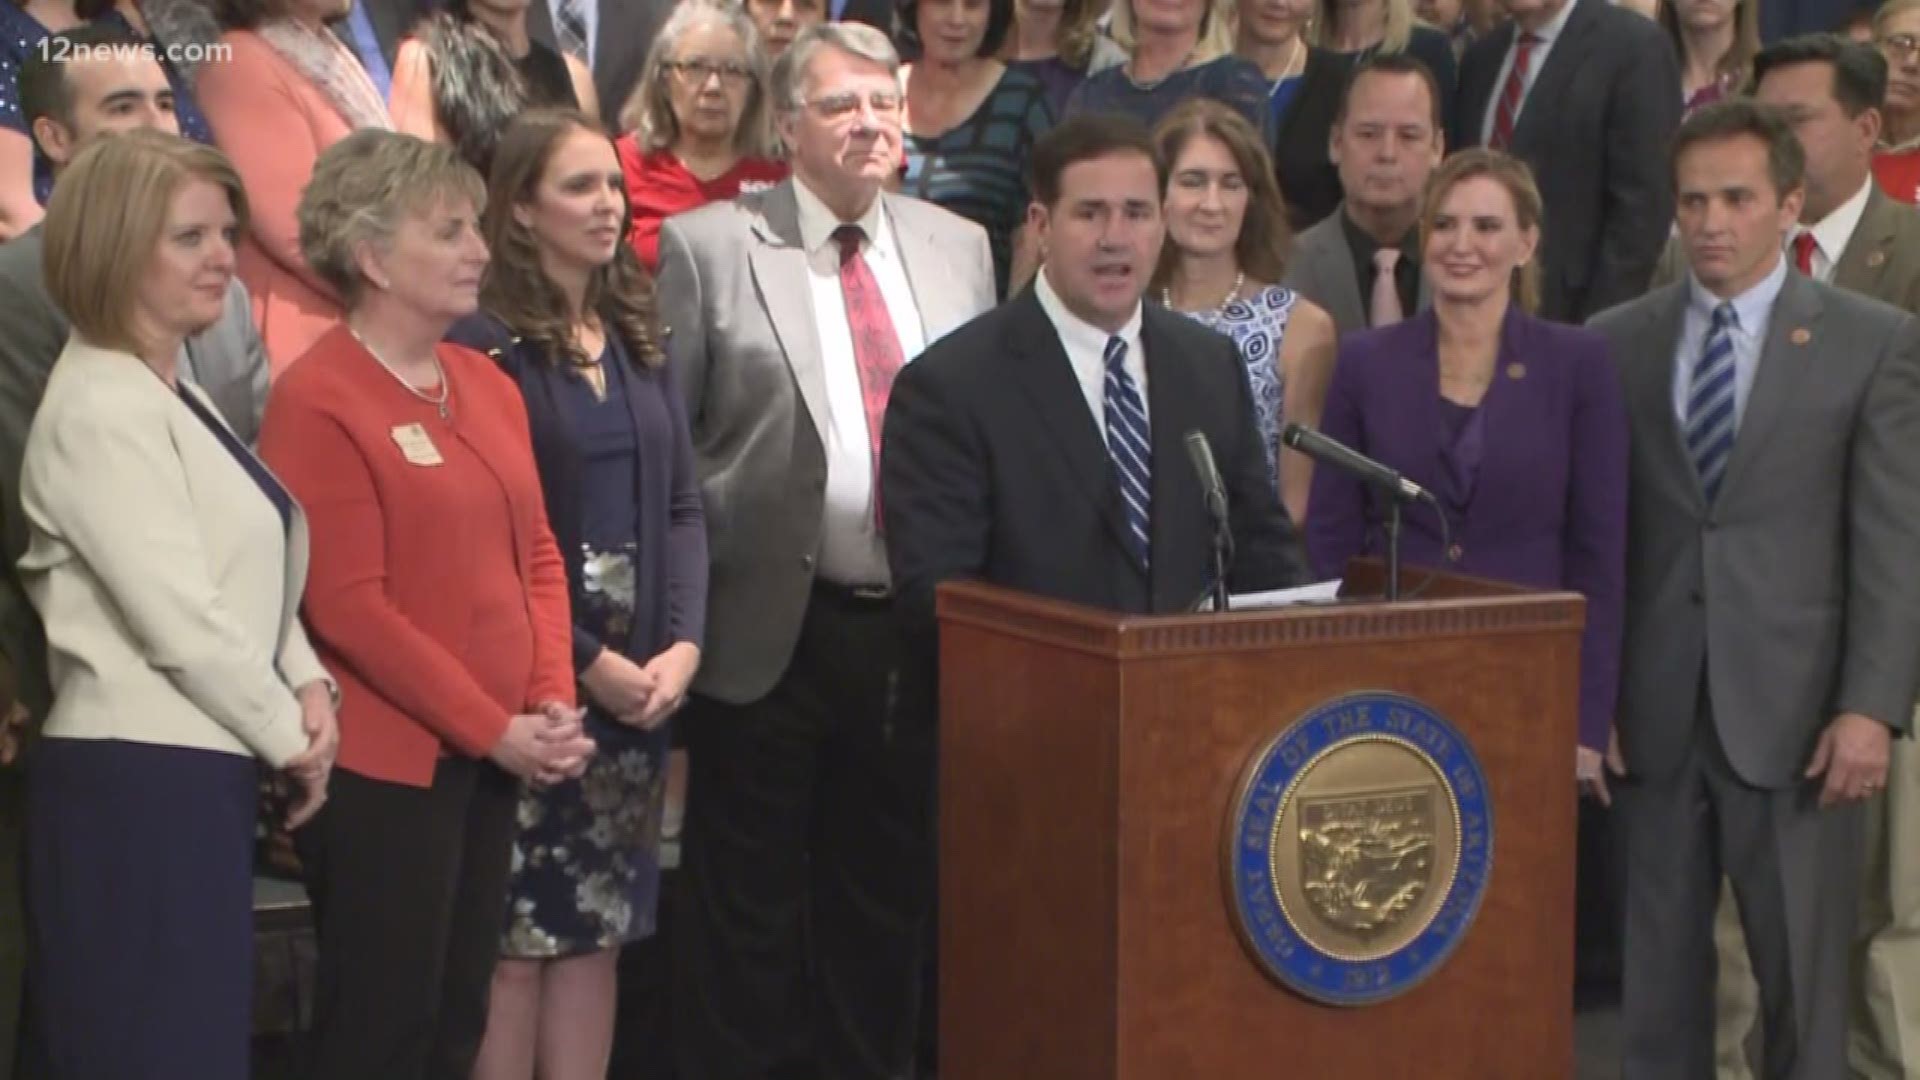 Educators seemed encouraged by Governor Ducey's plan to give teachers a net salary increase of 20 percent by 2020.